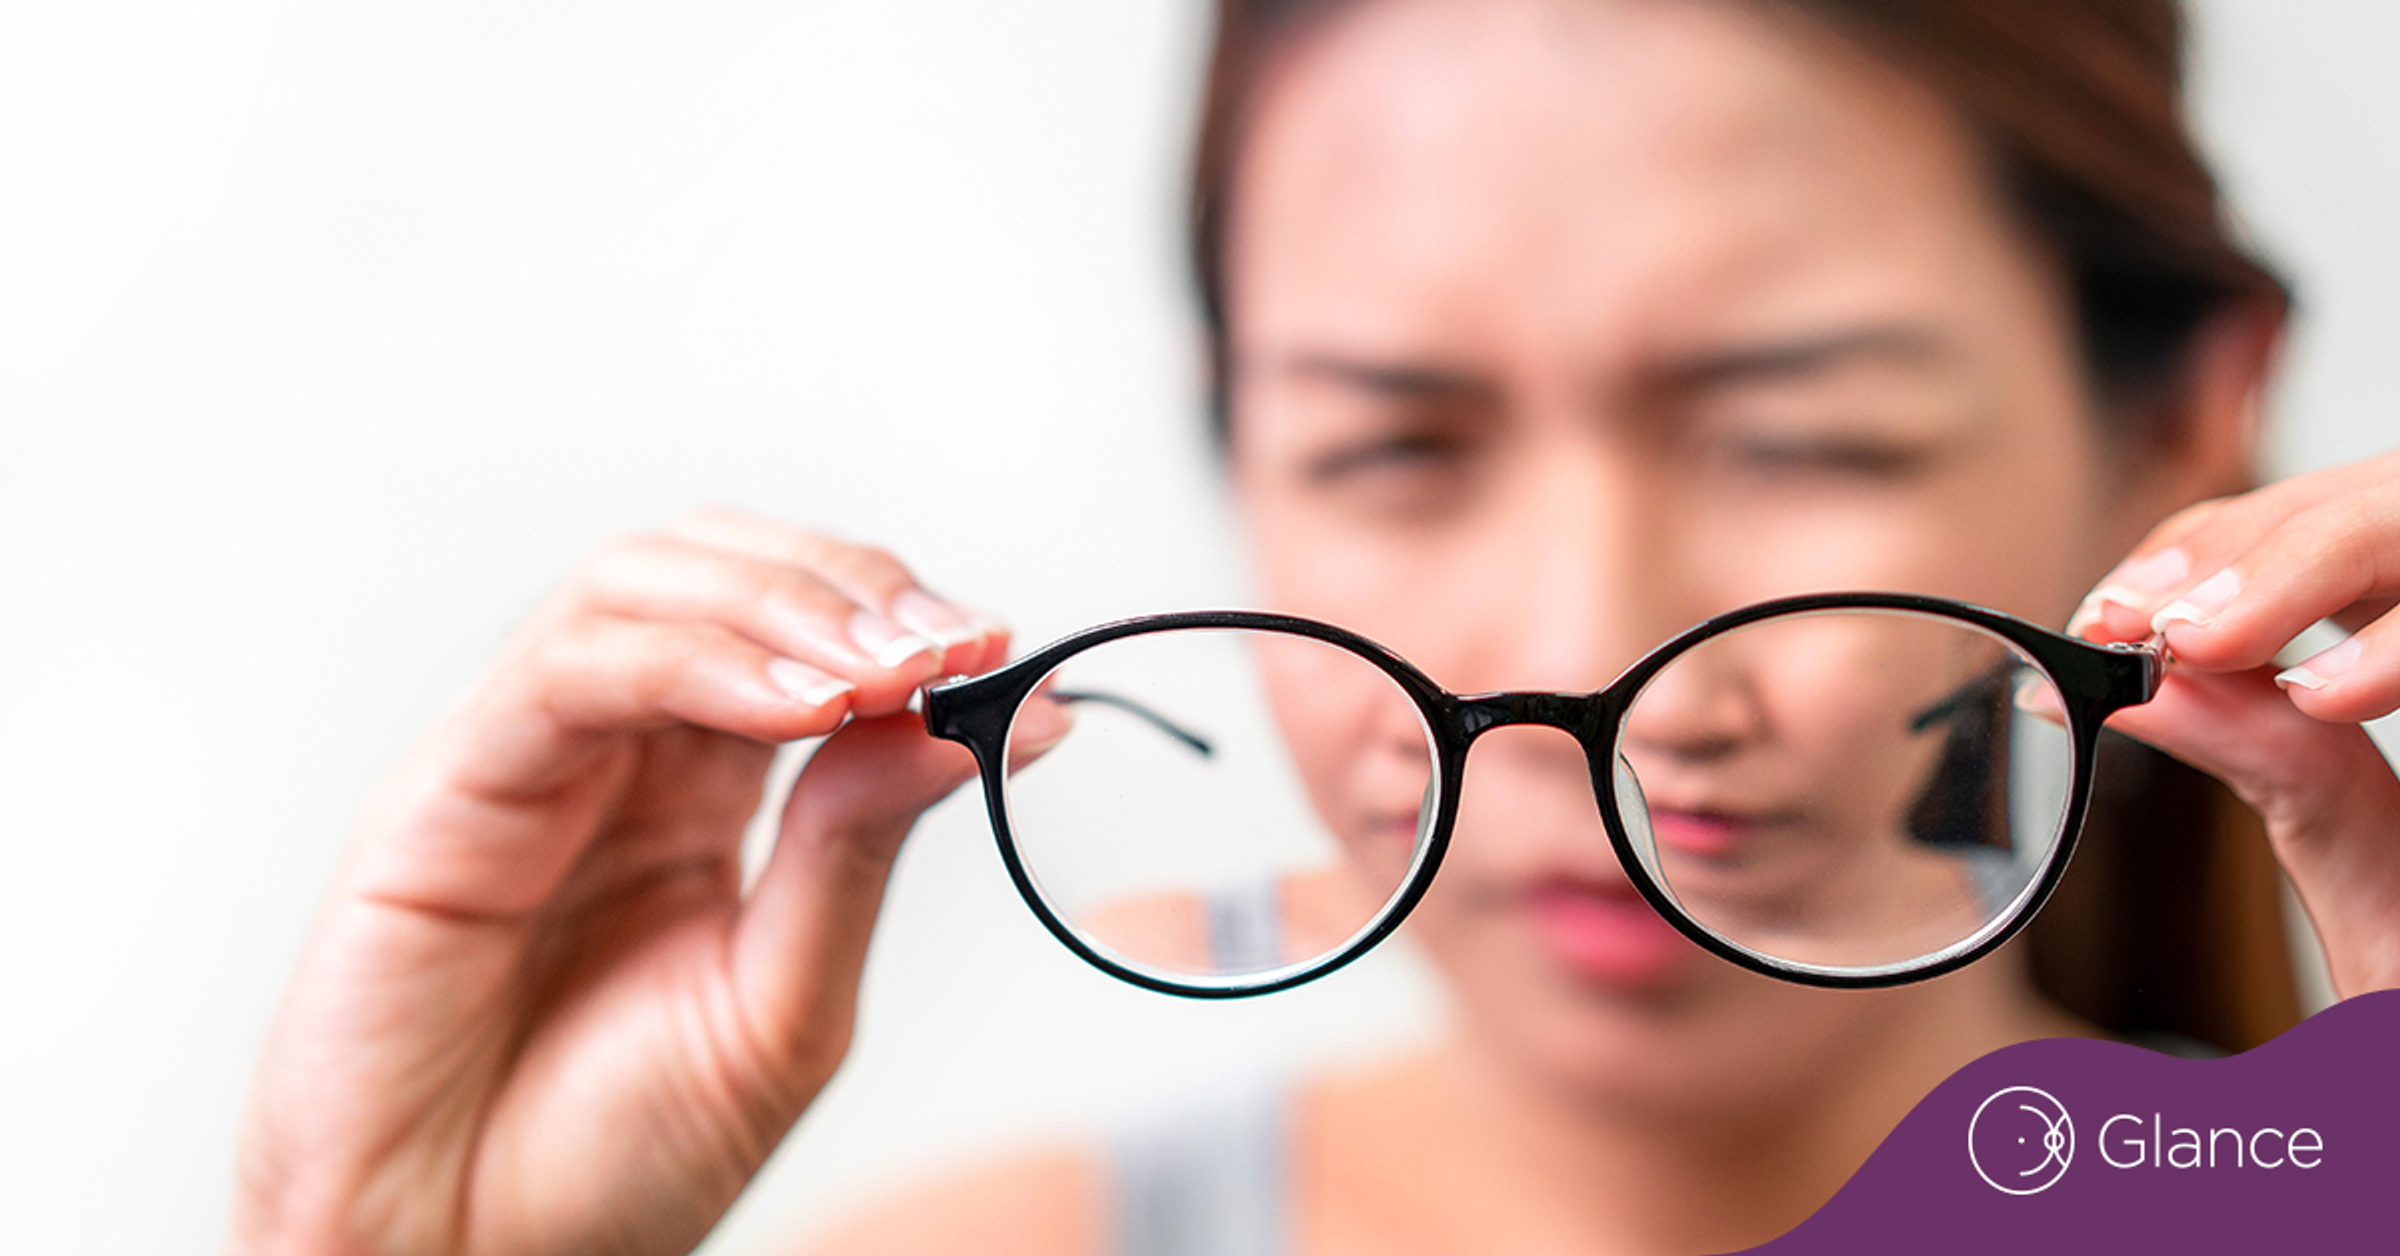 Does gender impact the risk for myopia development?